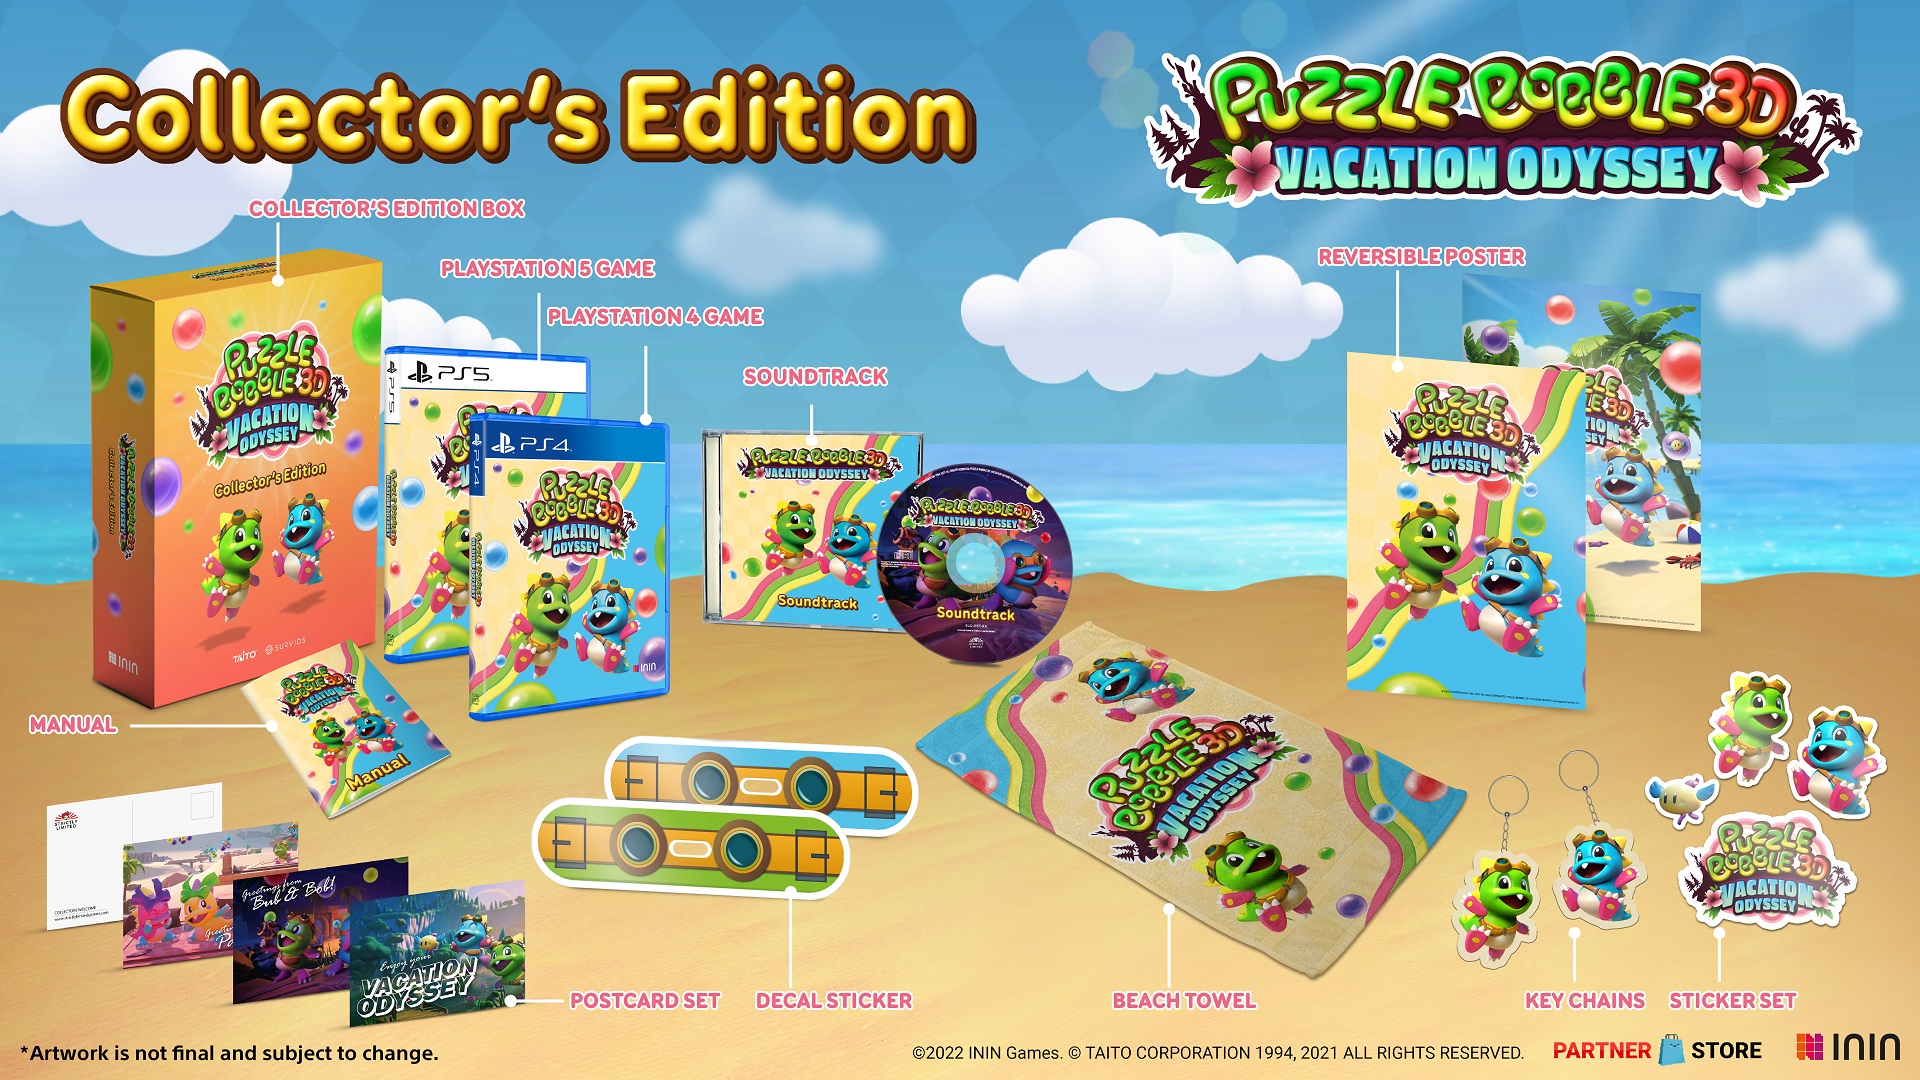 Puzzle Bobble 3D: Vacation Odyssey physical version announced